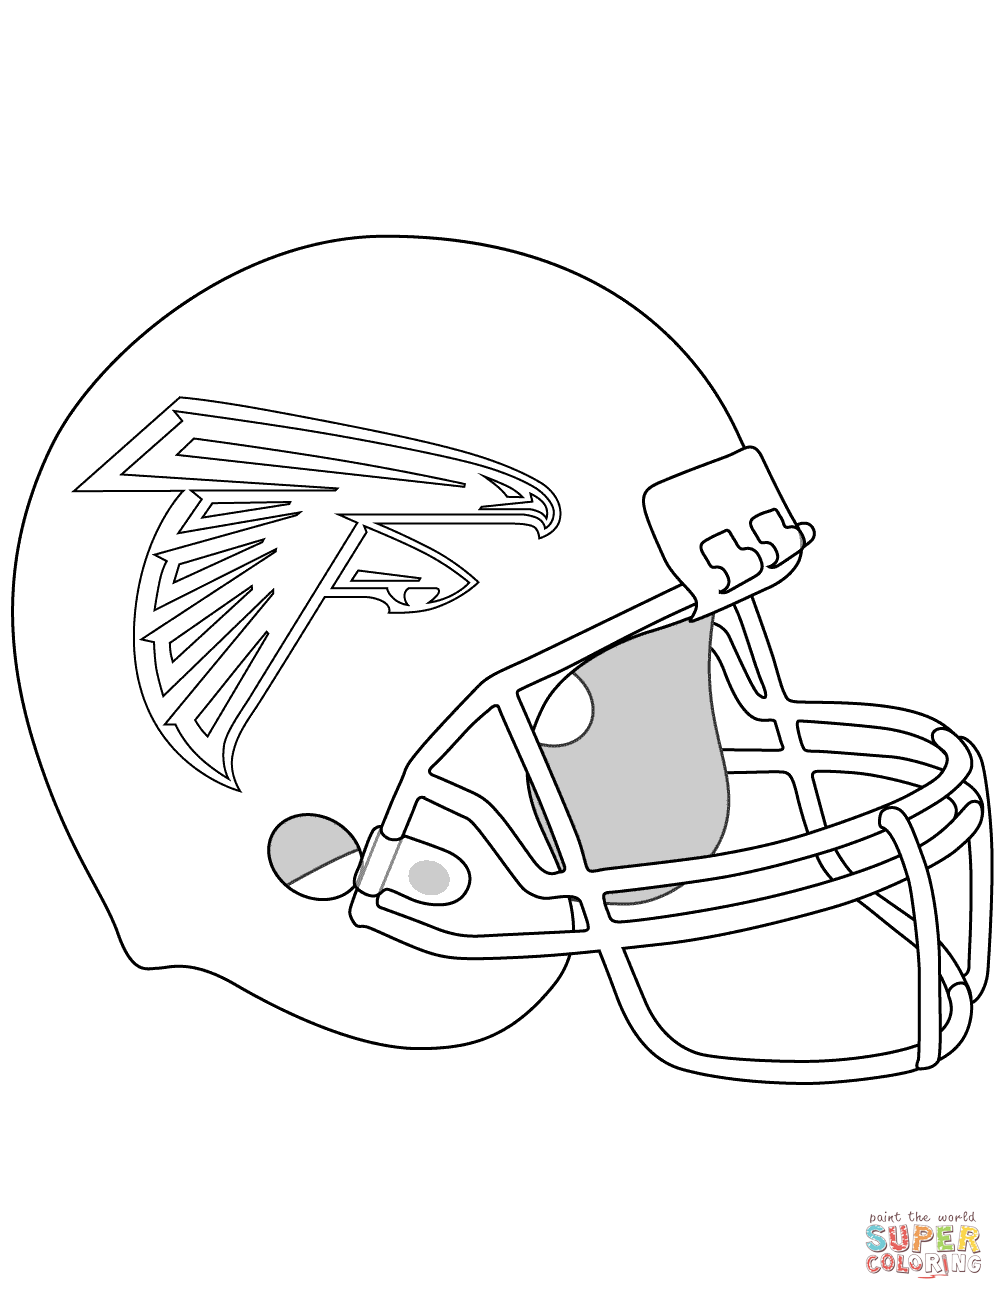 Atlanta falcons helmet coloring page free printable coloring pages